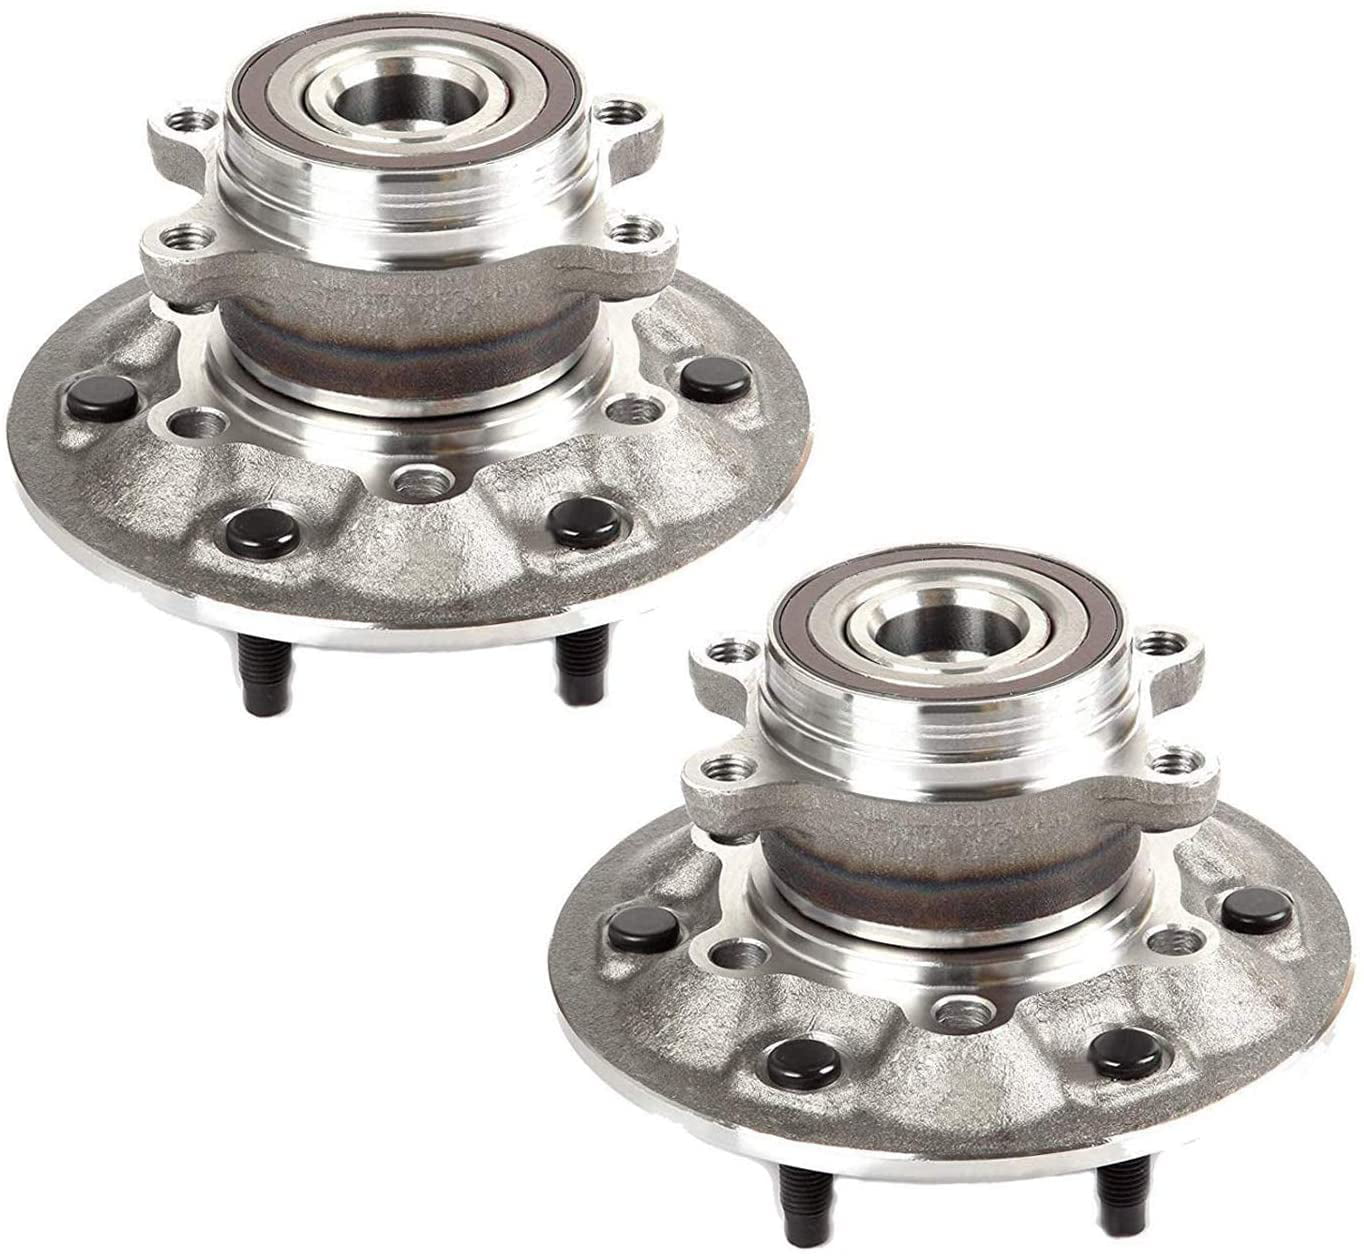 MOOG Front Wheel Bearing & Hub for 2009-2012 Chevy Colorado GMC Canyon 4WD w/ABS